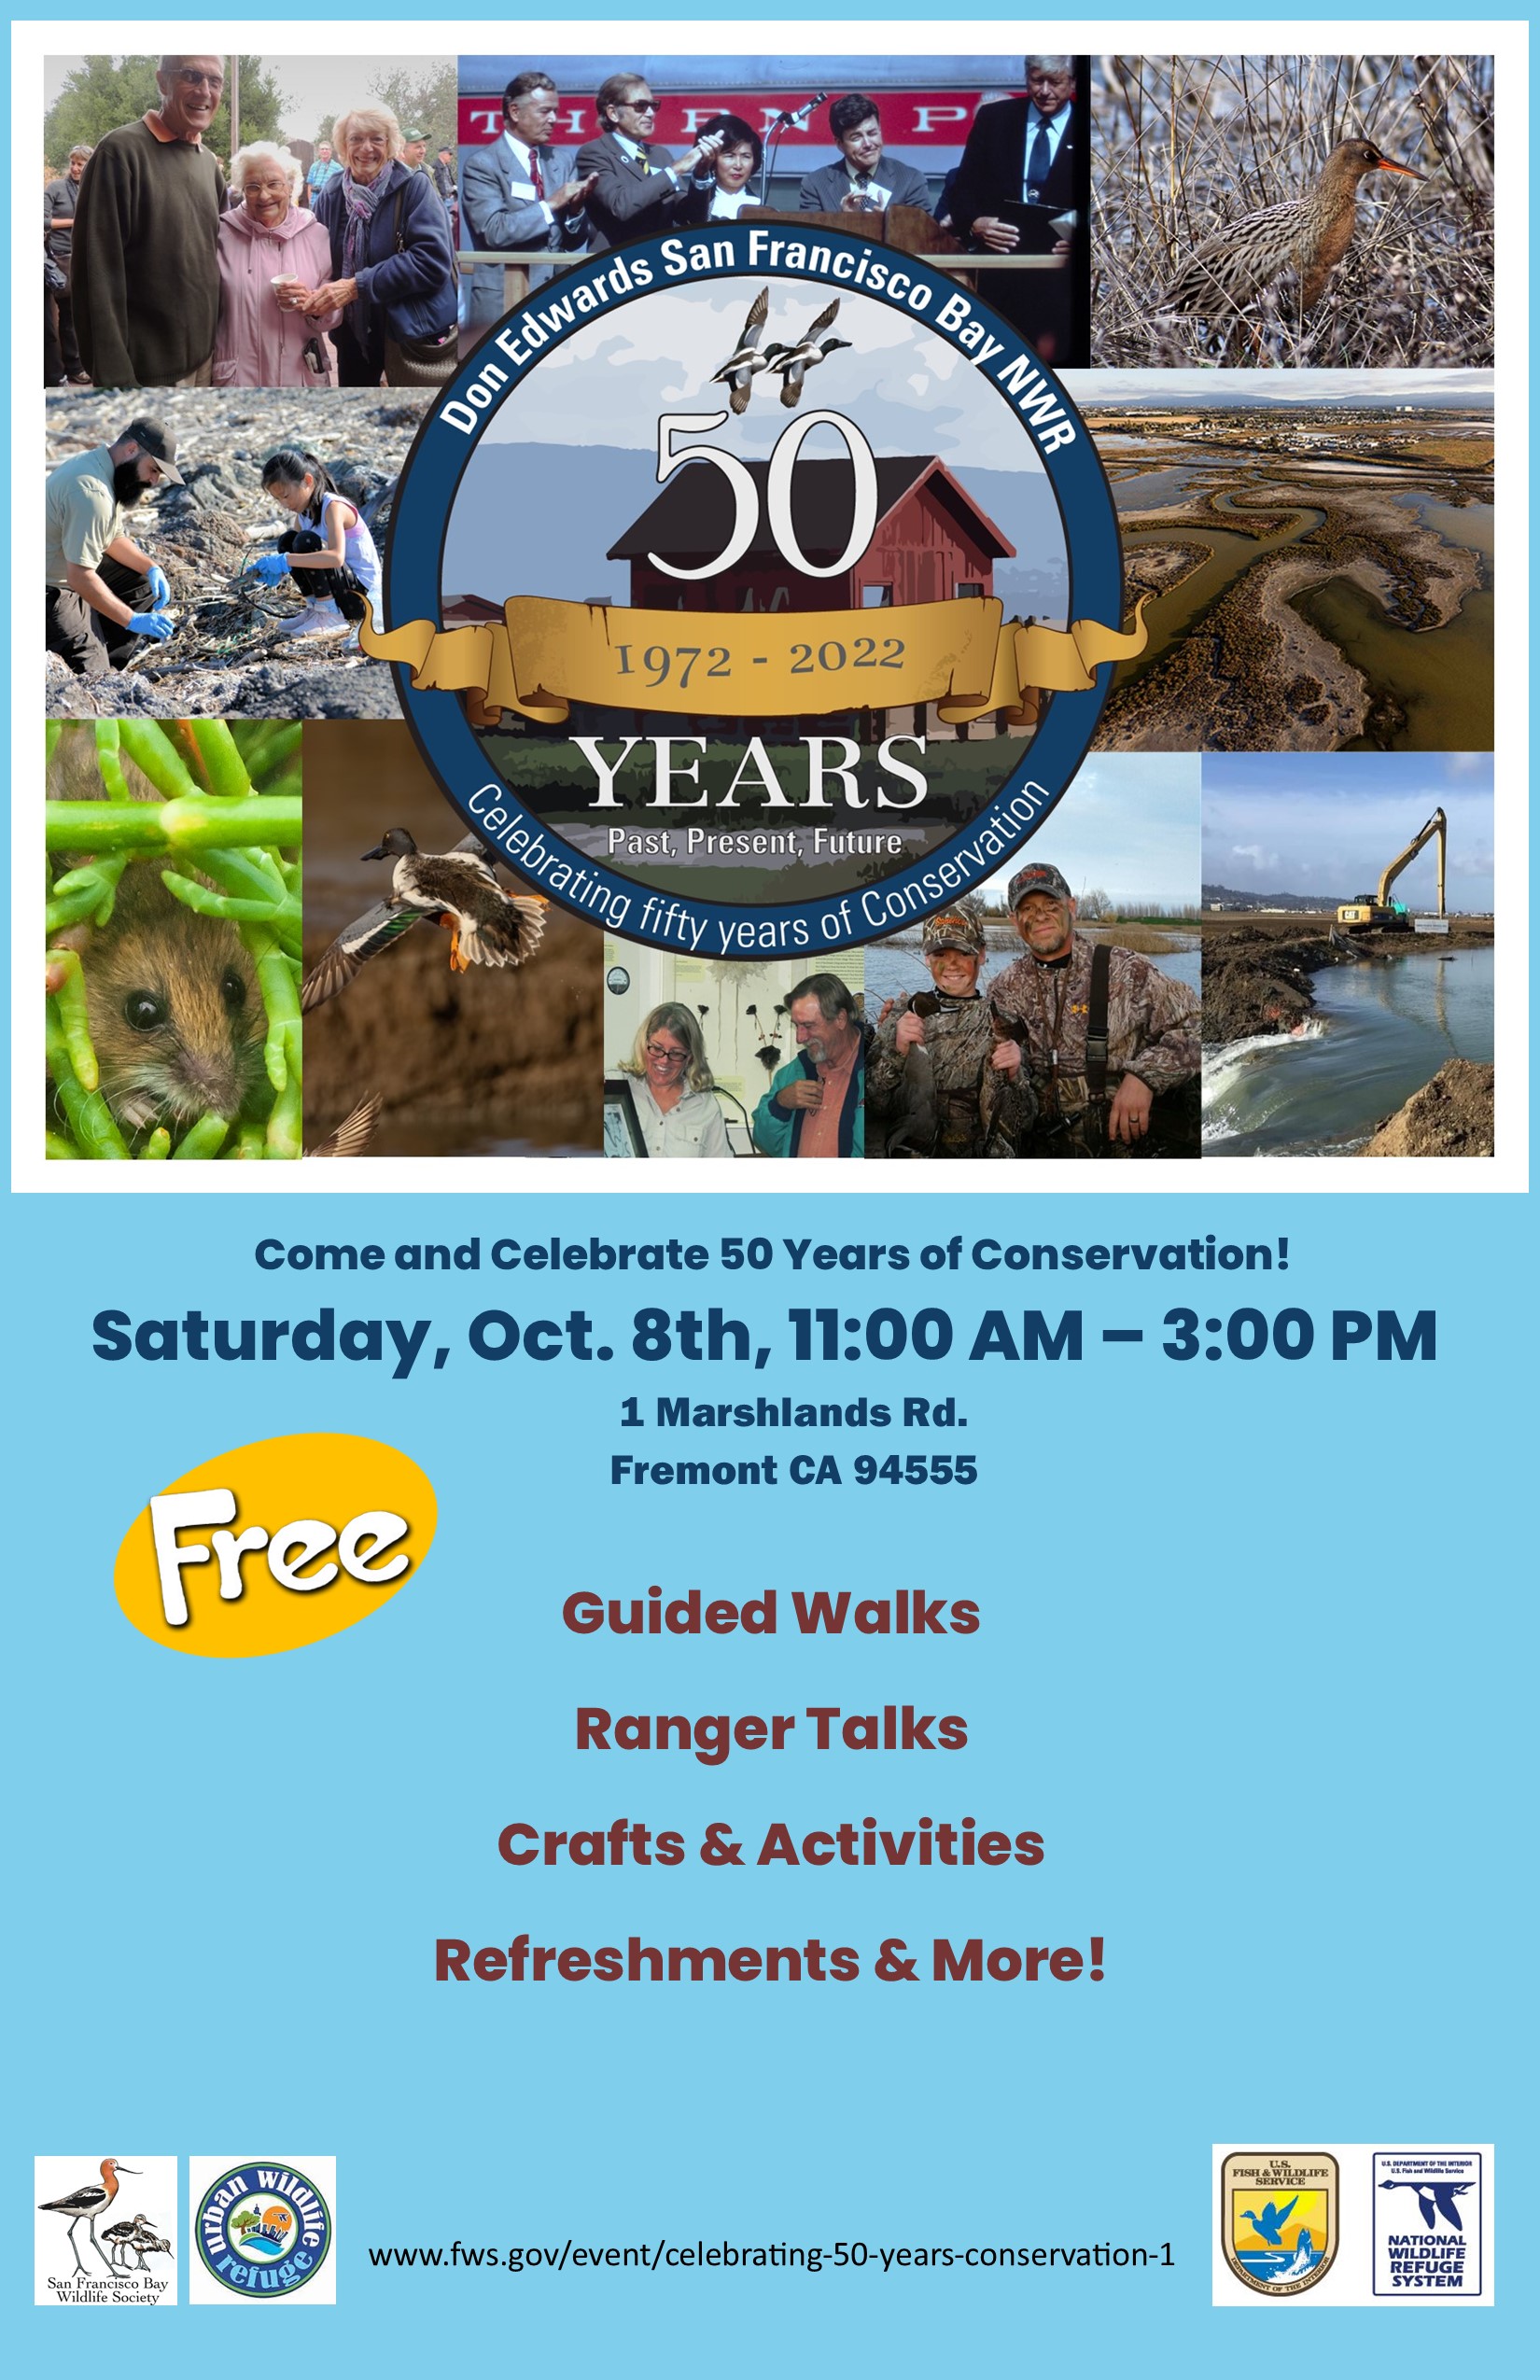 Celebrating 50 Years of Conservation at Don Edwards SF Bay NWR, 2022